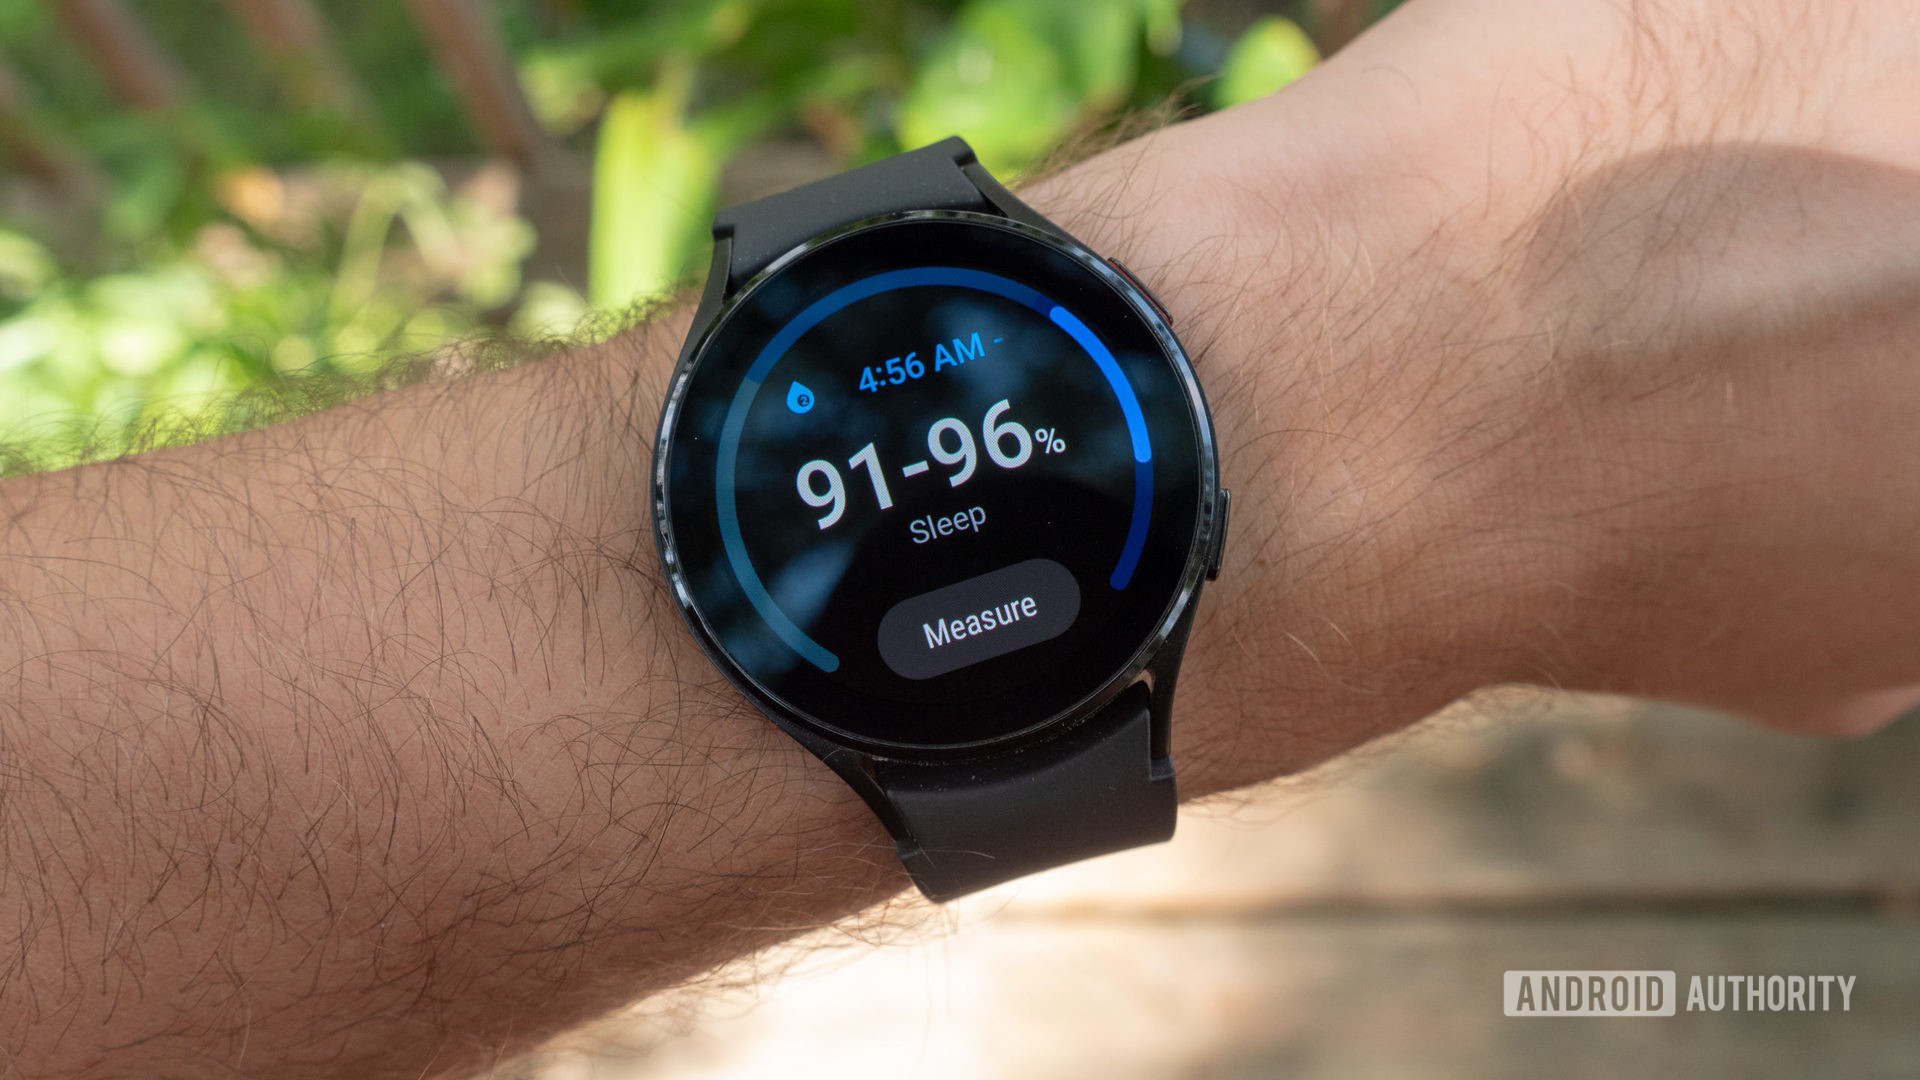 The Samsung Galaxy Watch 4 on a man's wrist showing the nighttime SpO2 monitoring screen.